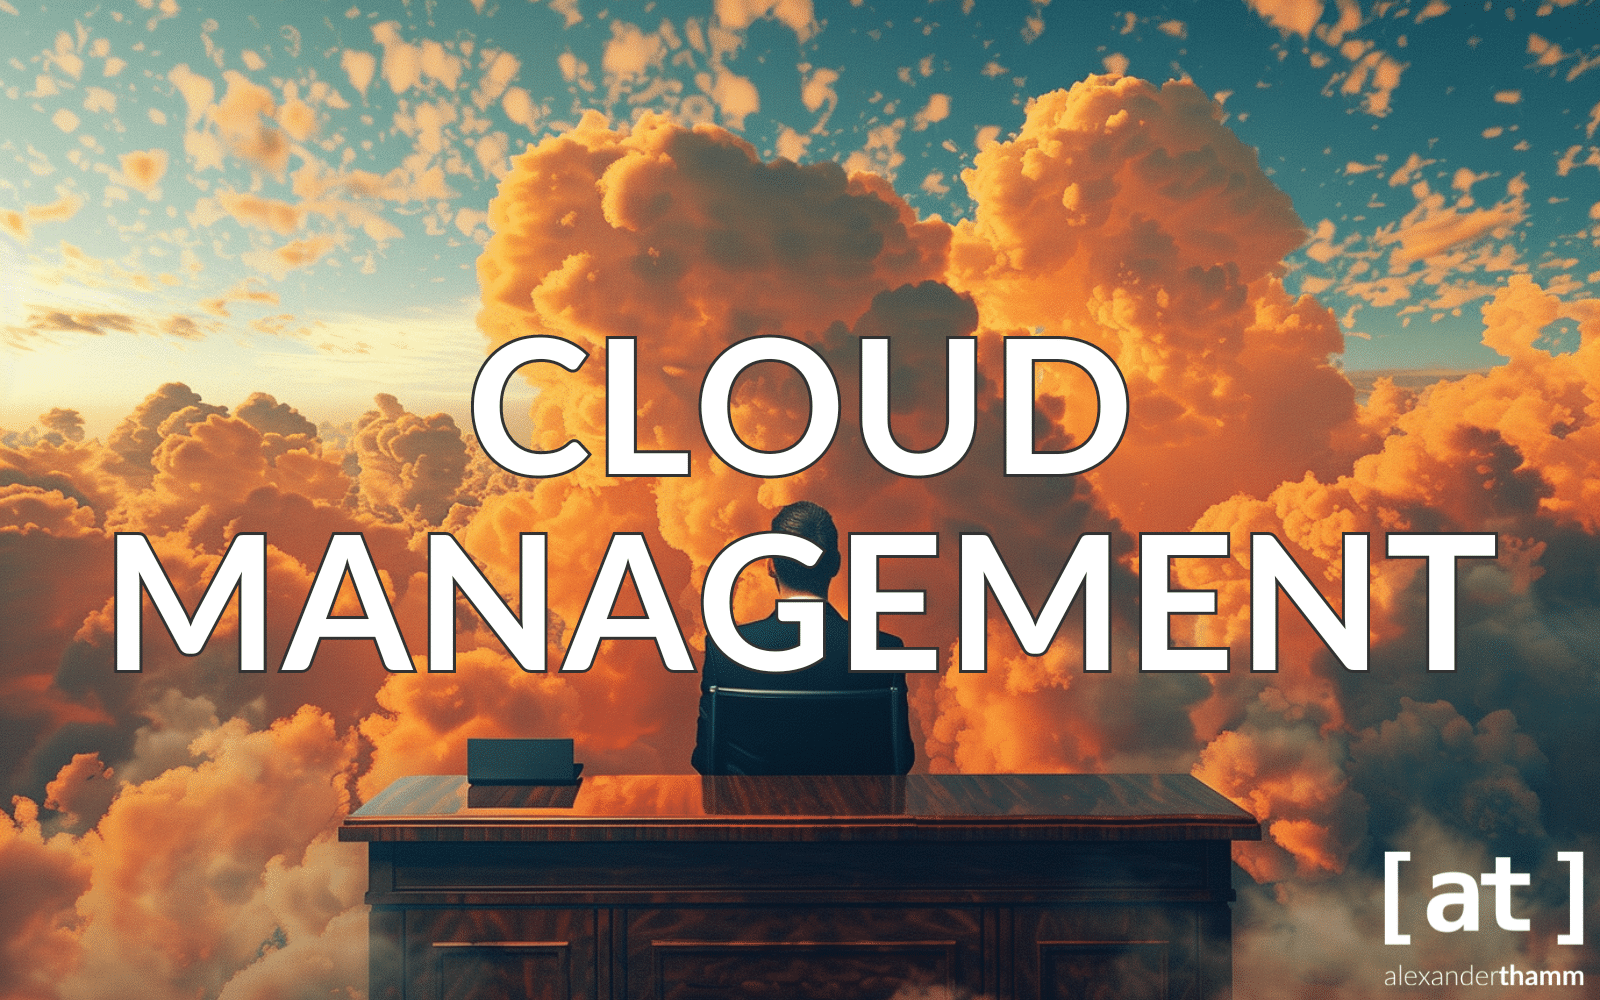 Cloud management, a manager sitting behind his desk and gazing at the evening horizon full of clouds